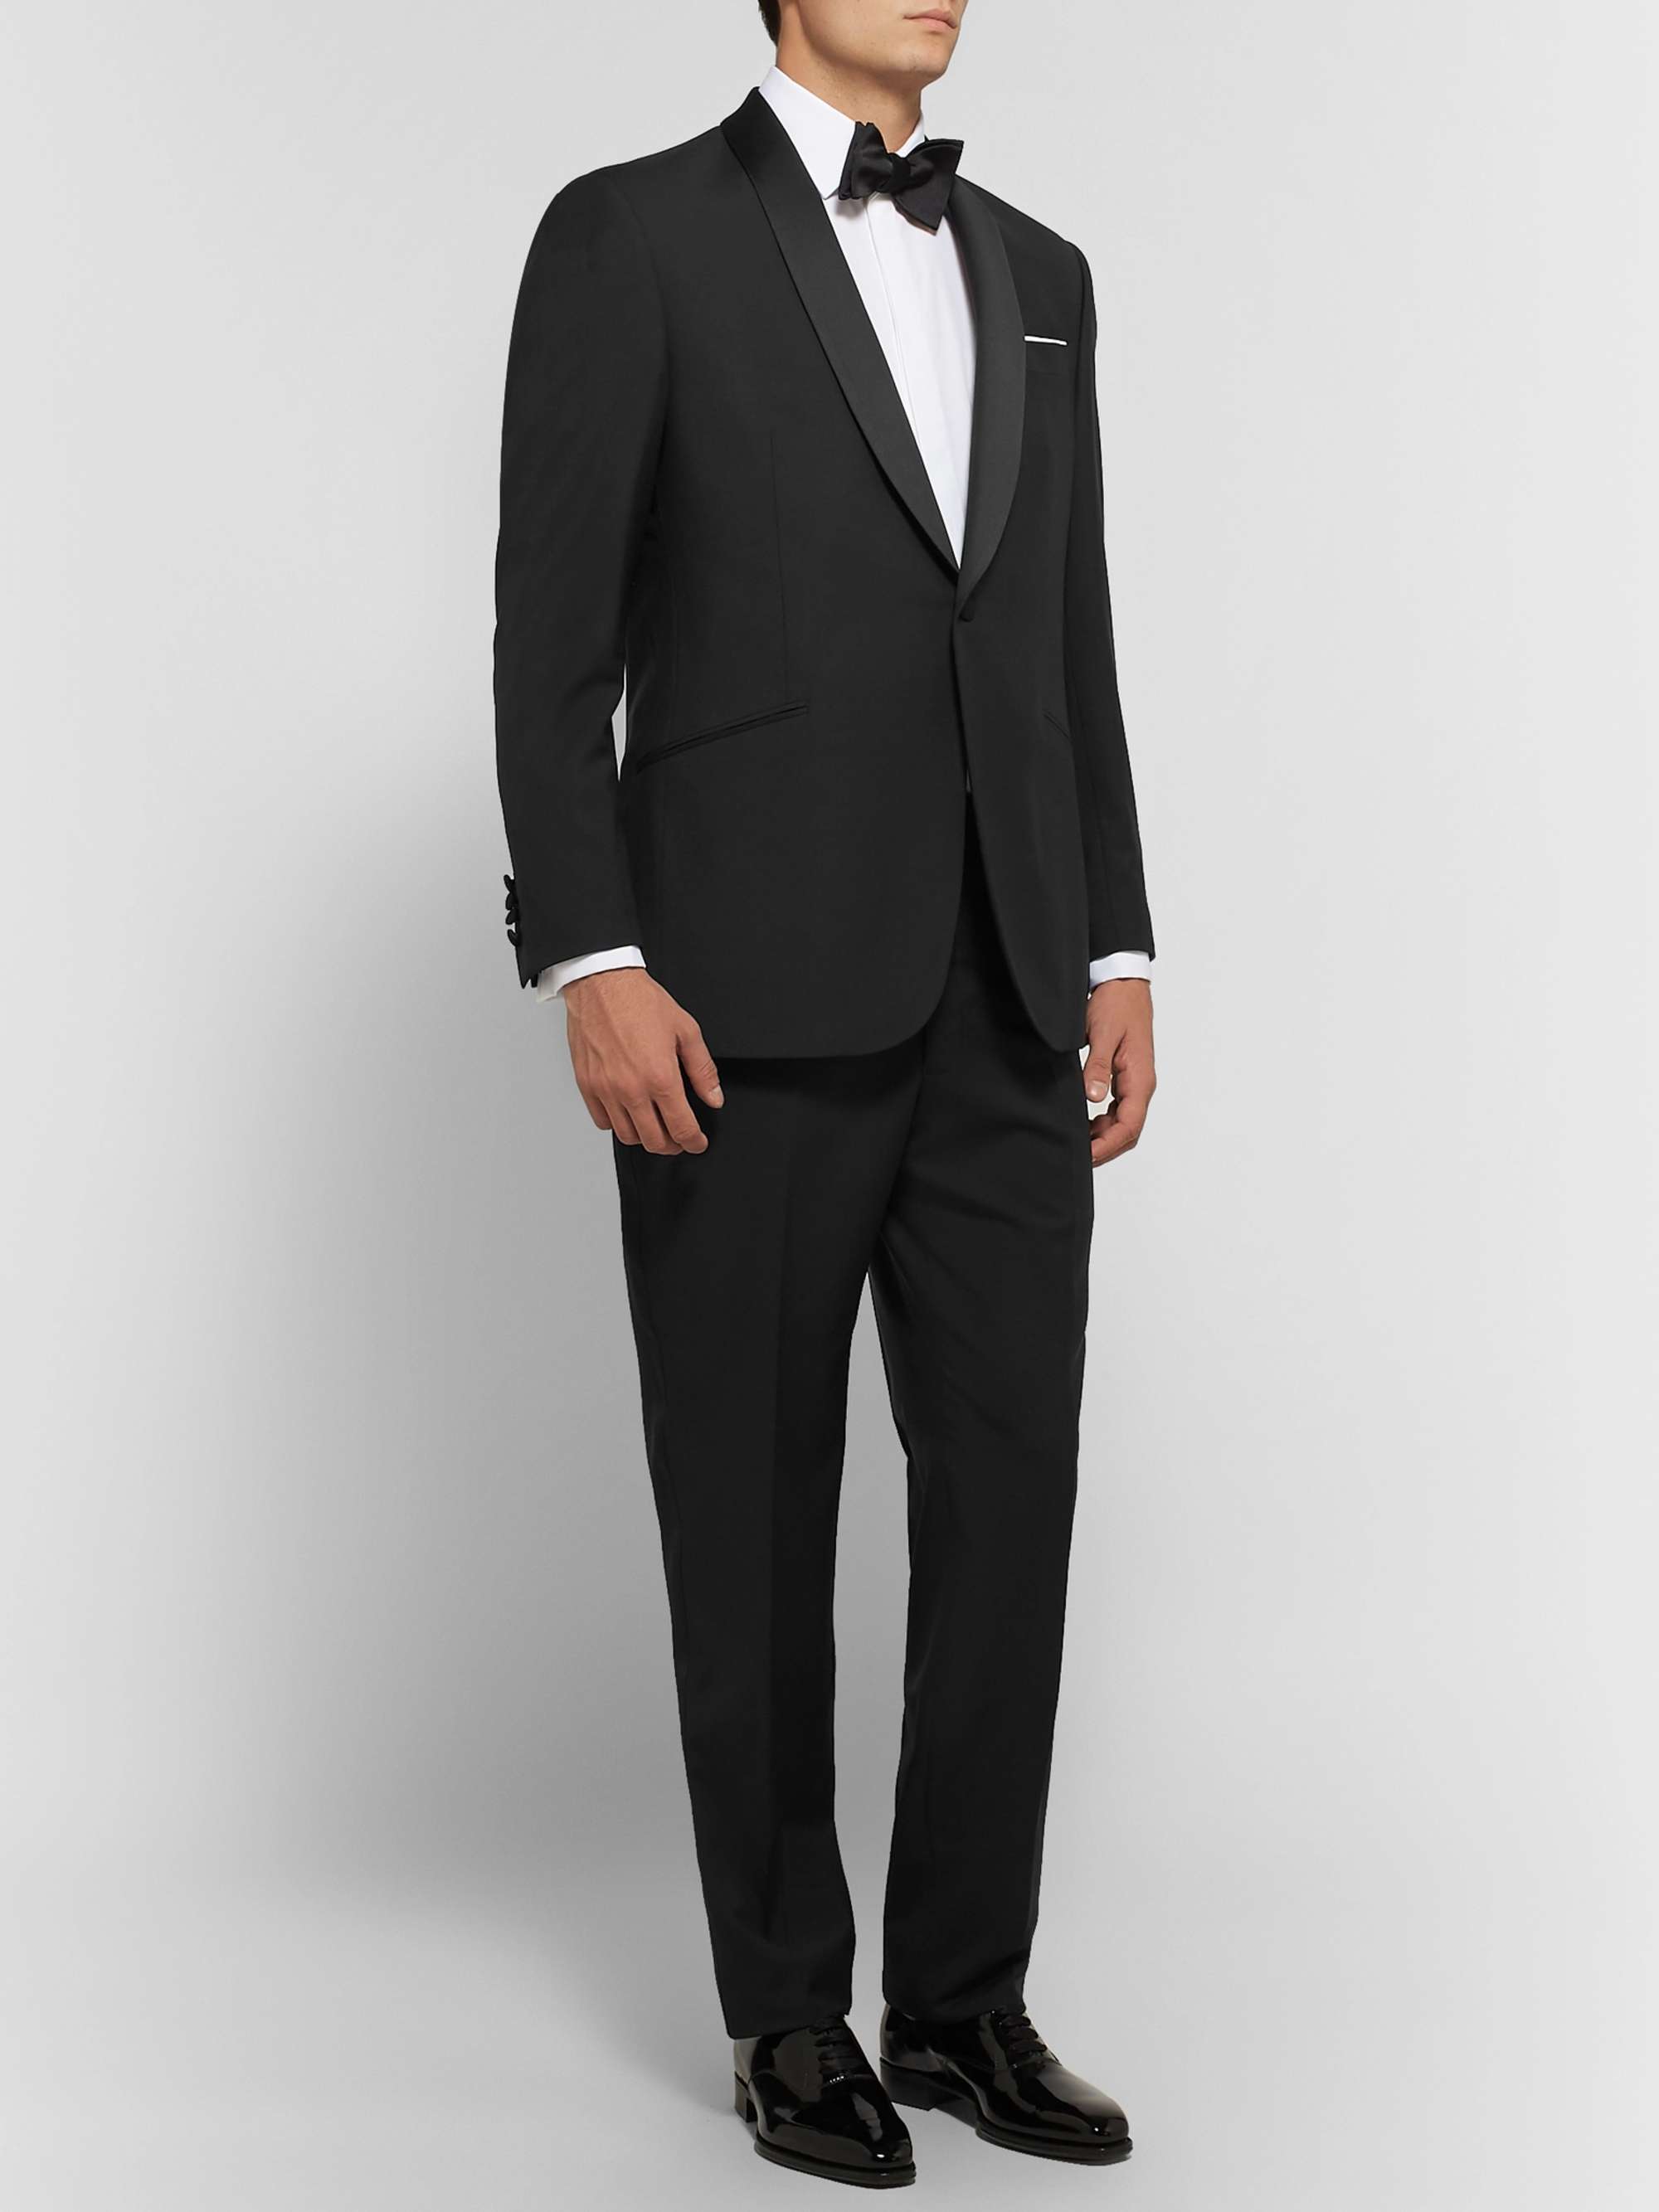 RICHARD JAMES Black Satin-Trimmed Wool and Mohair-Blend Tuxedo Trousers